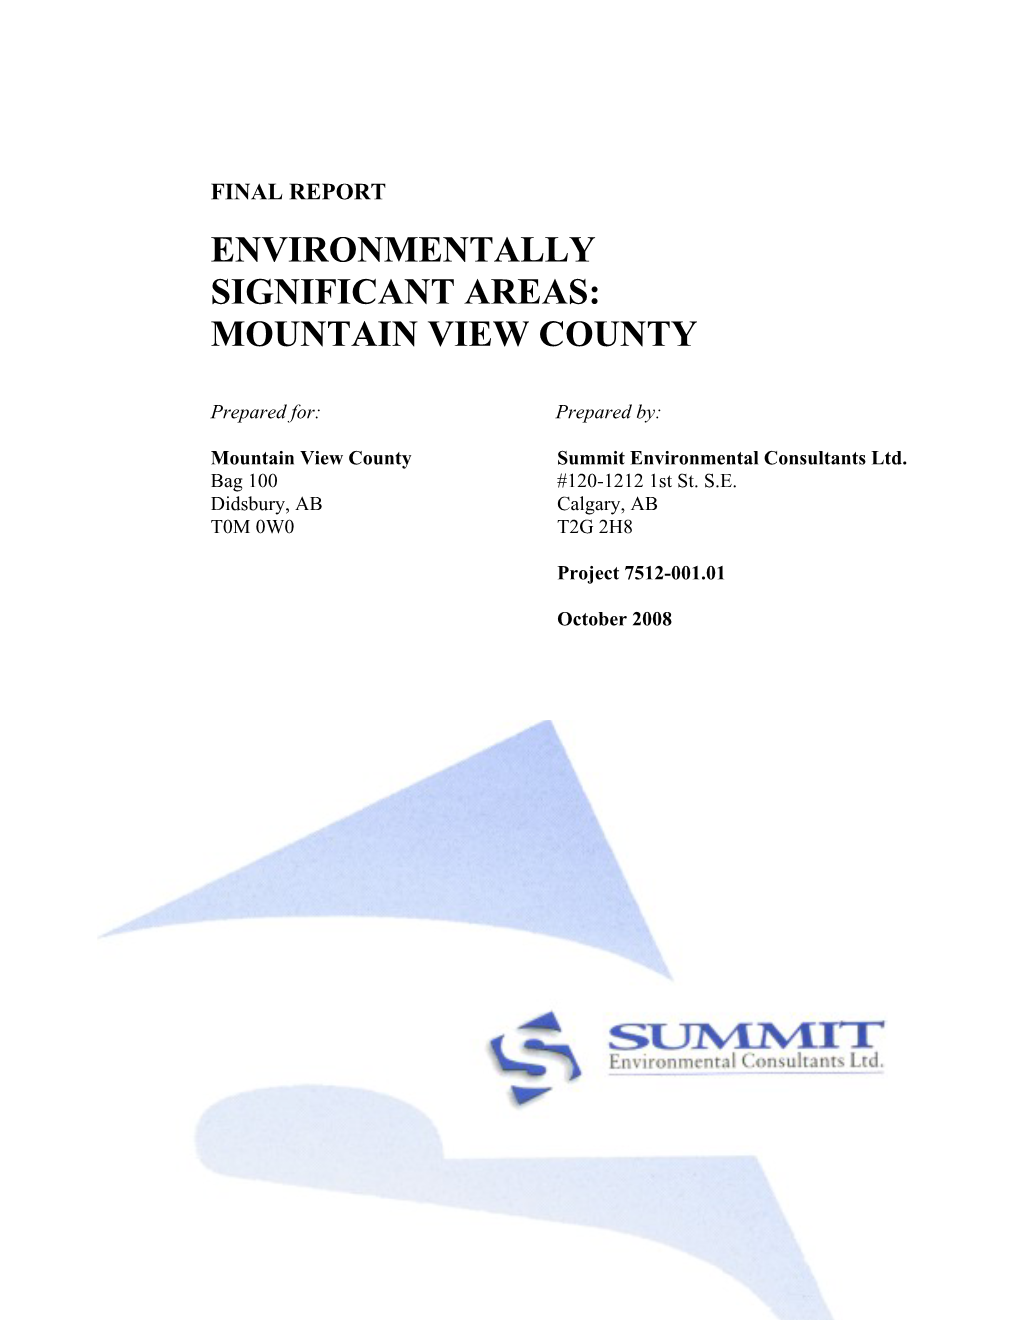 Environmentally Significant Areas: Mountain View County